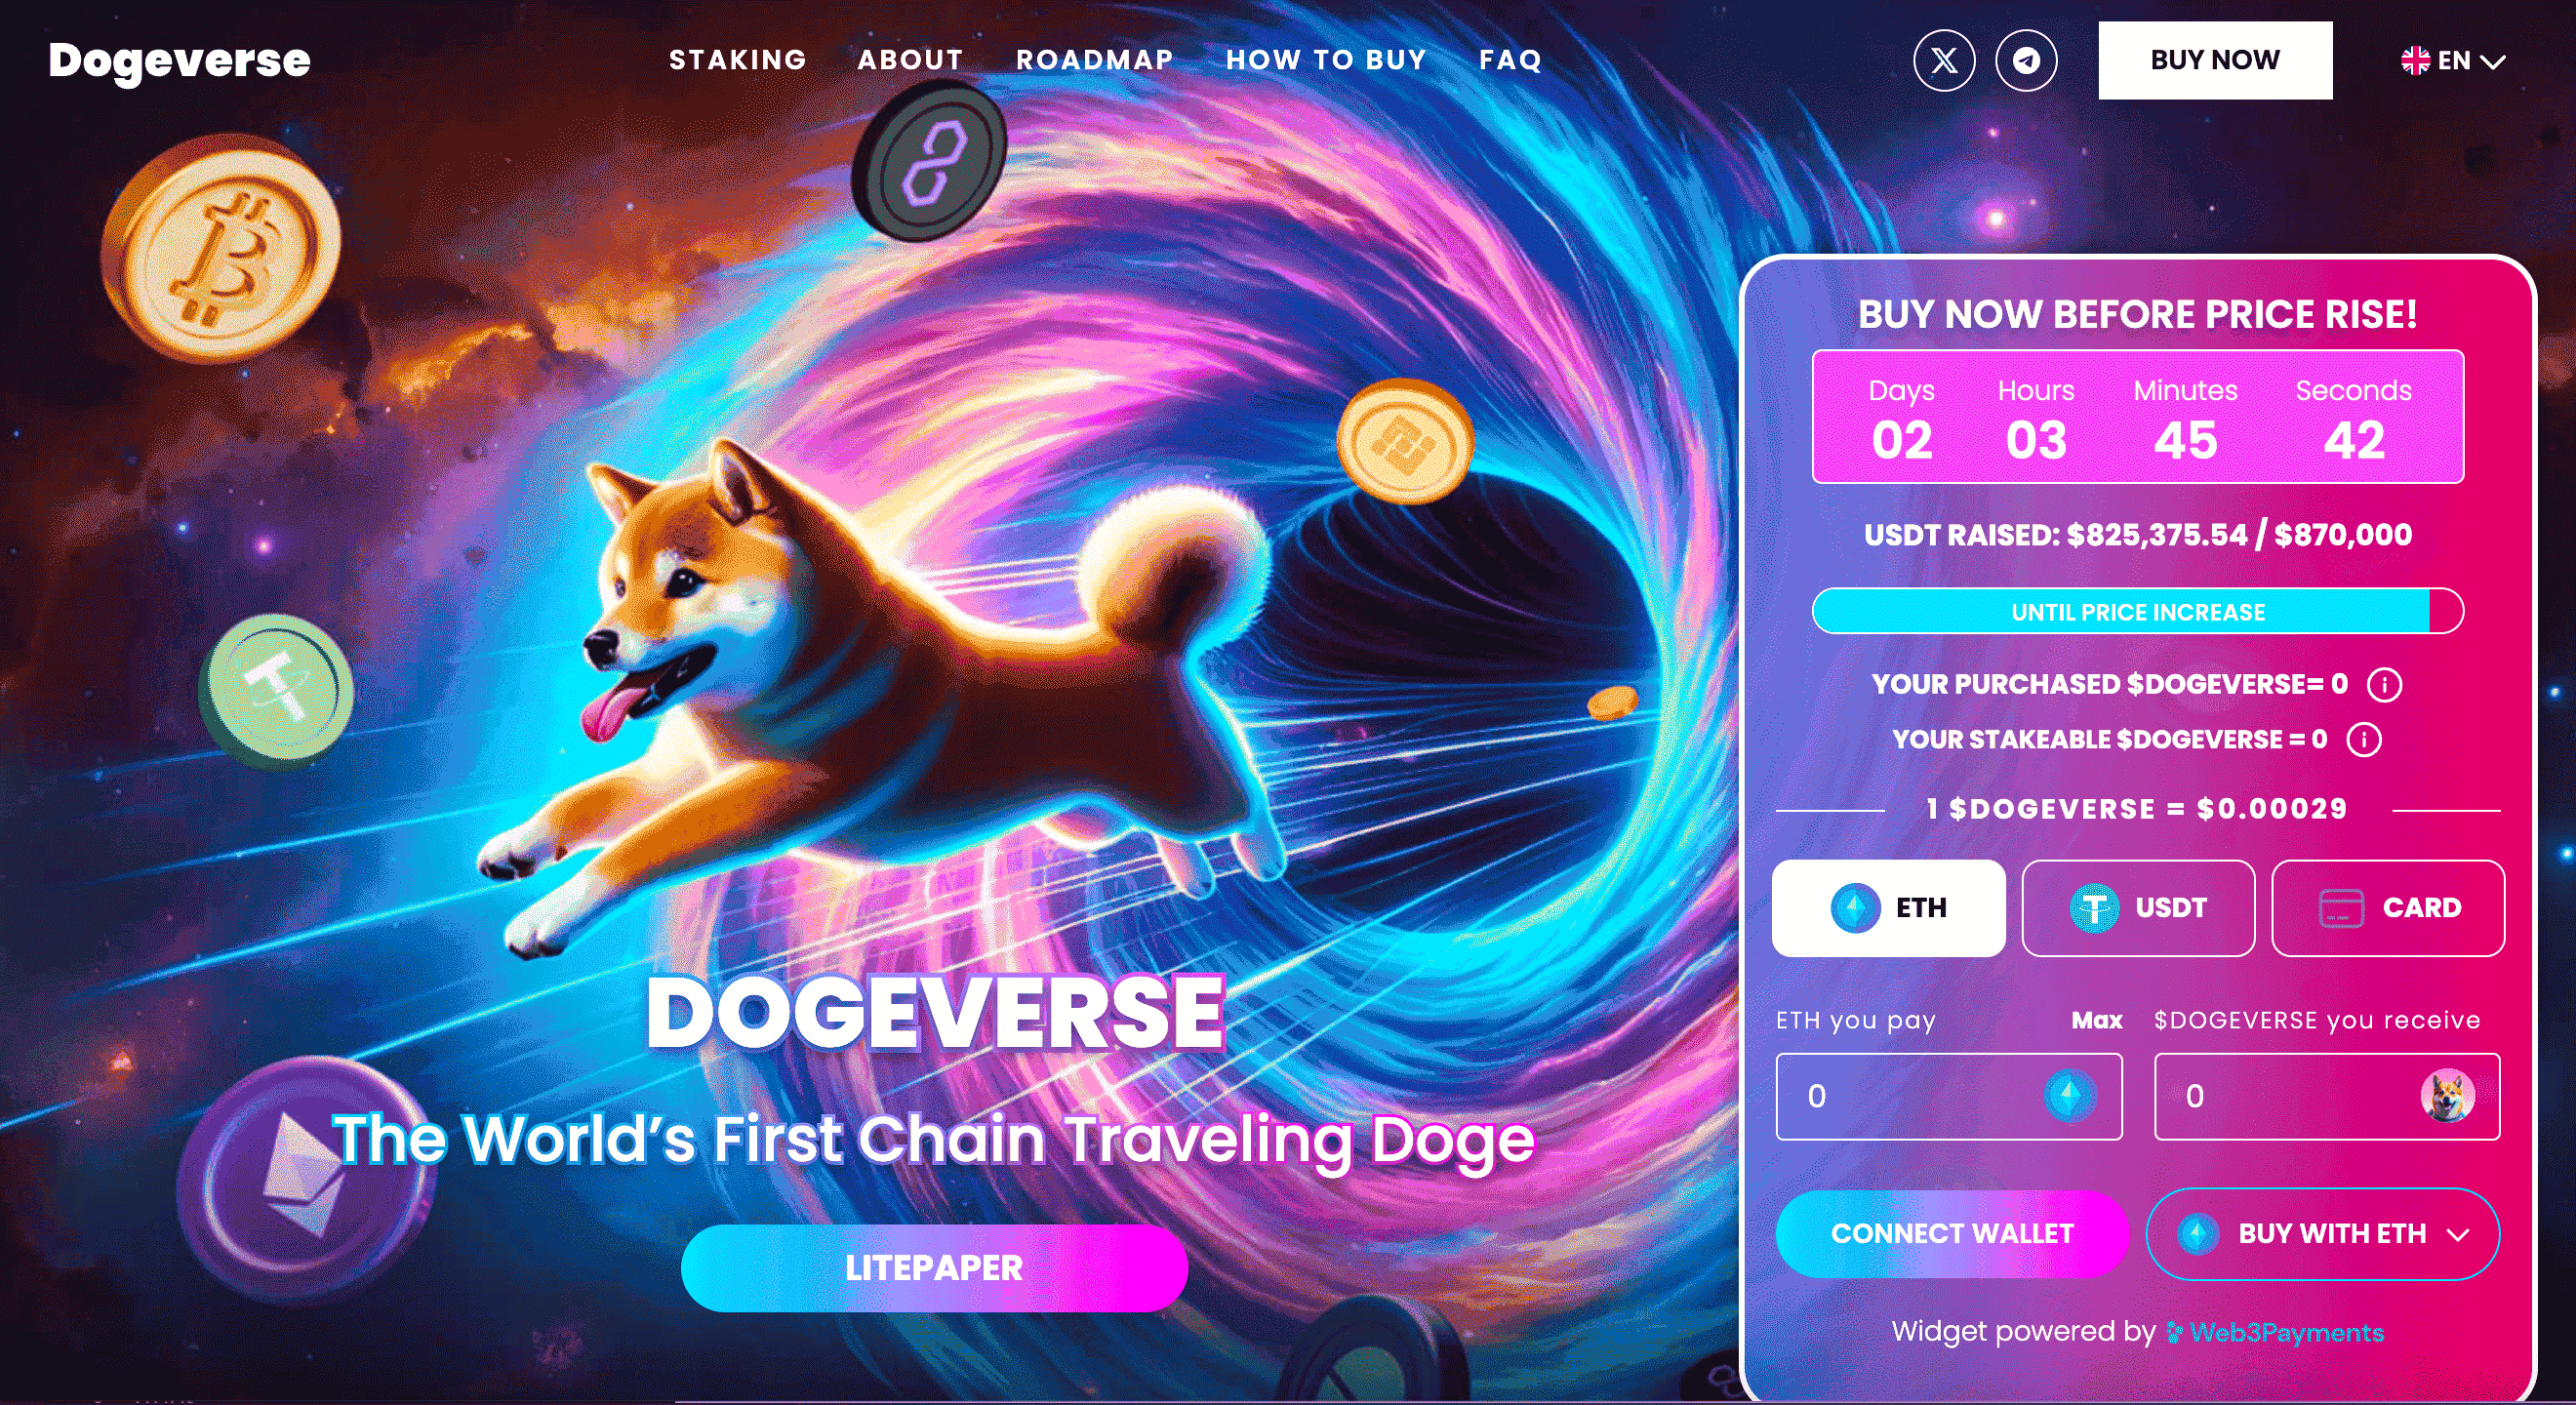 How to Buy Dogeverse ($DOGEVERSE) – Easy Guide